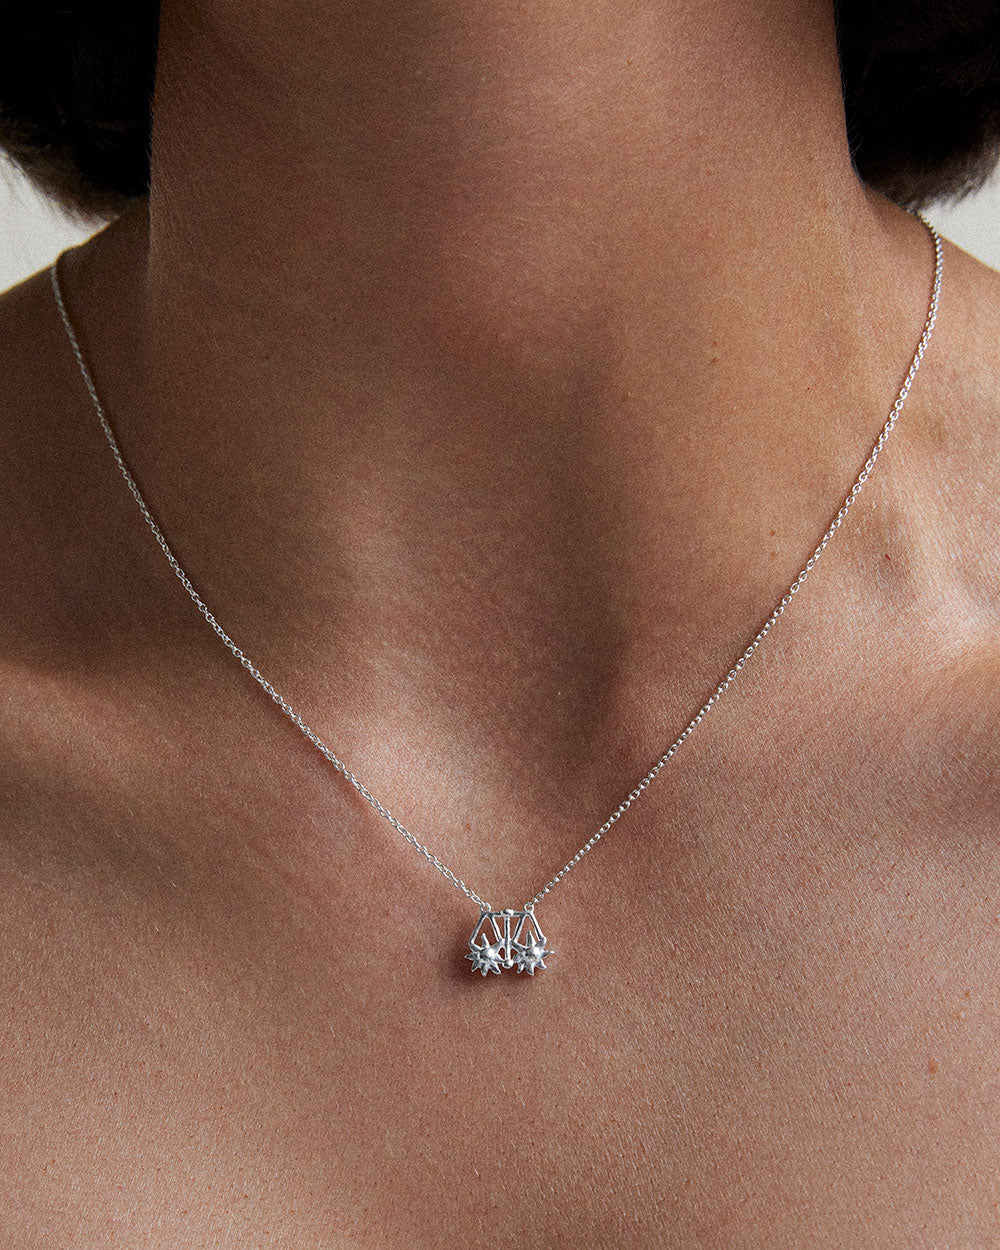 LIBRA STAR SIGN NECKLACE (STERLING SILVER)